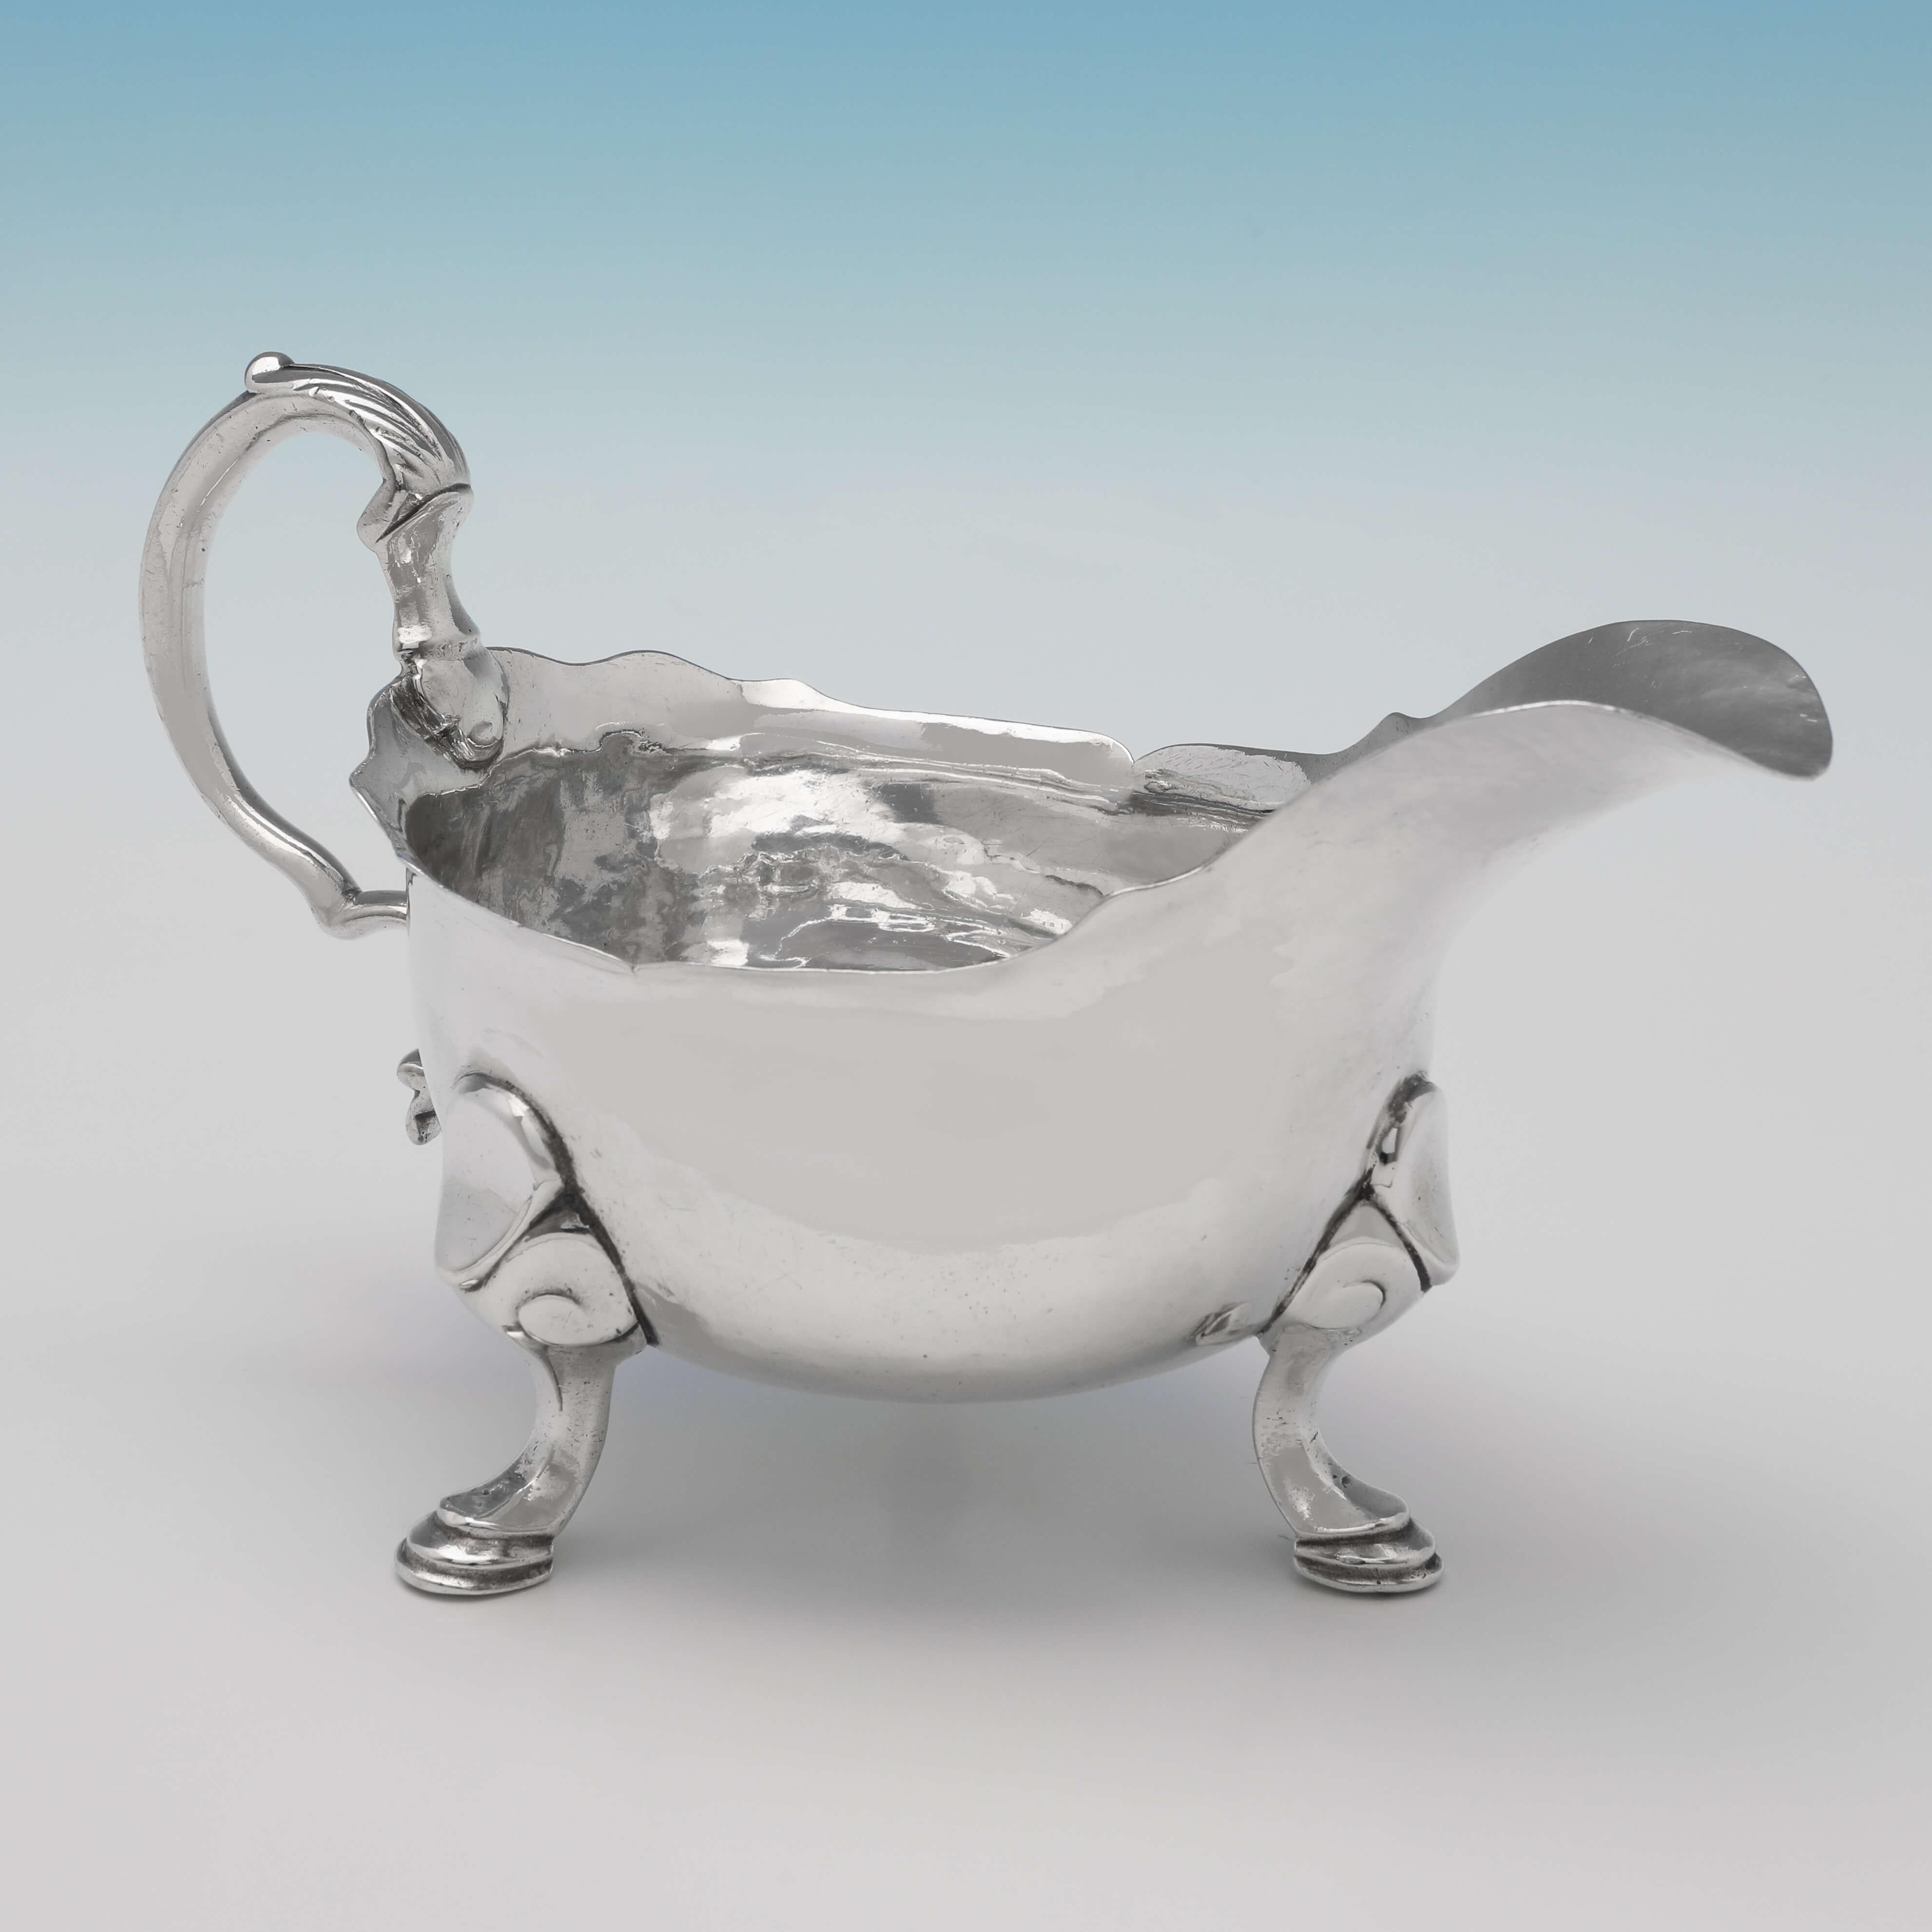 Hallmarked in London in 1750, this handsome, George II, Antique Sterling Silver Sauce Boat, features a shaped border, an acanthus detailed handle, an engraved crest to one side, and stands on three feet. The sauce boat measures 4.25